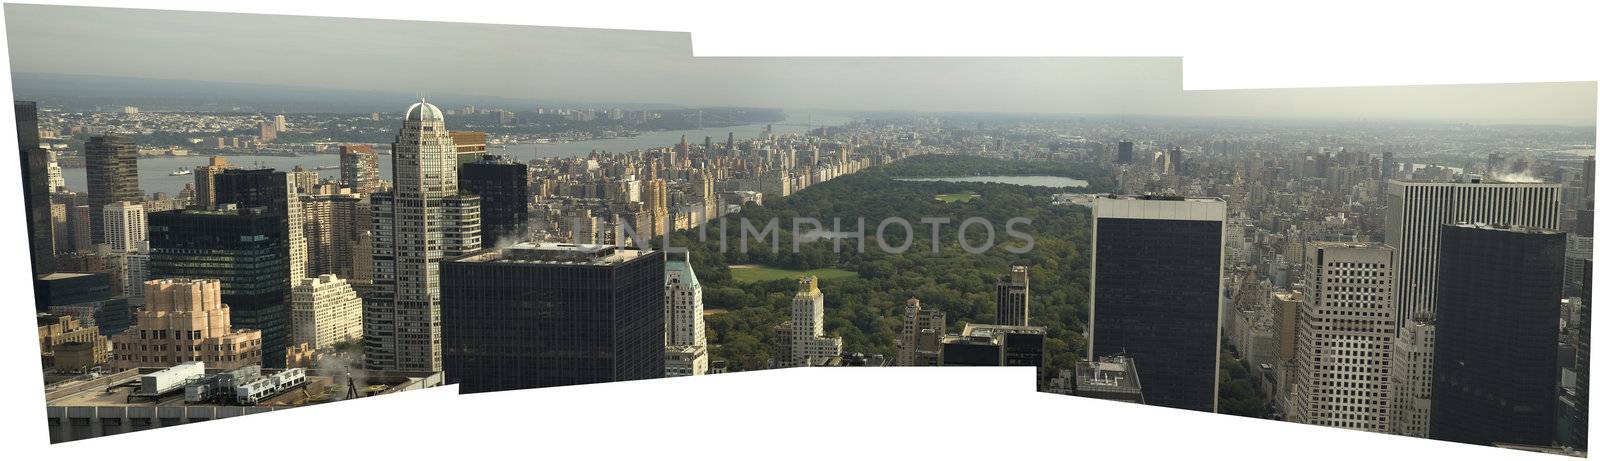 central park panorama by rorem